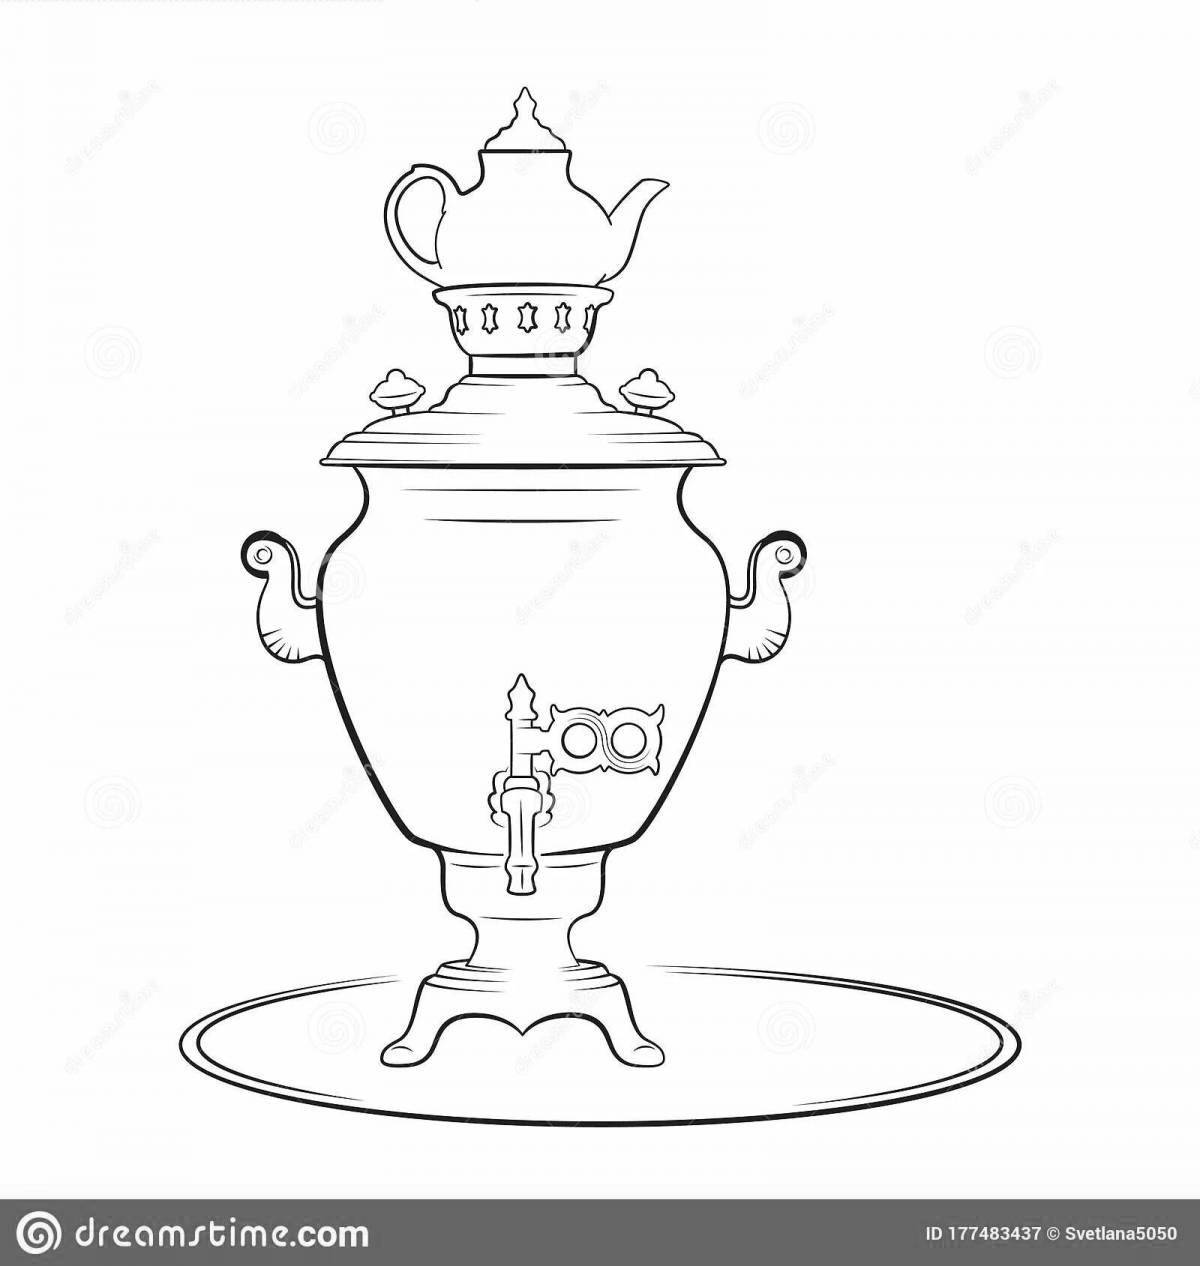 Coloring book exquisite Tula samovar